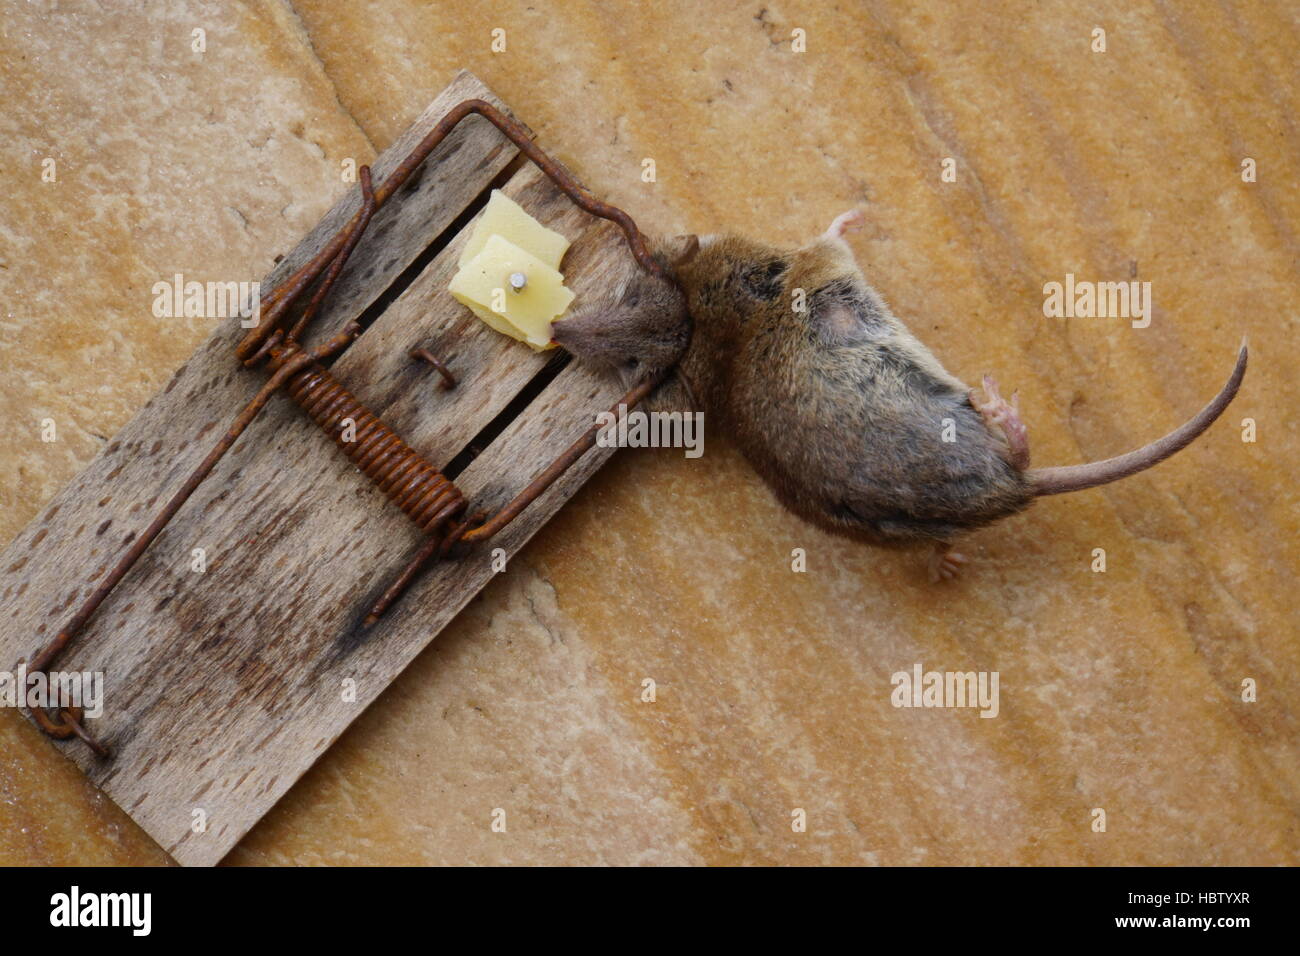 shrew in a mouse trap Stock Photo